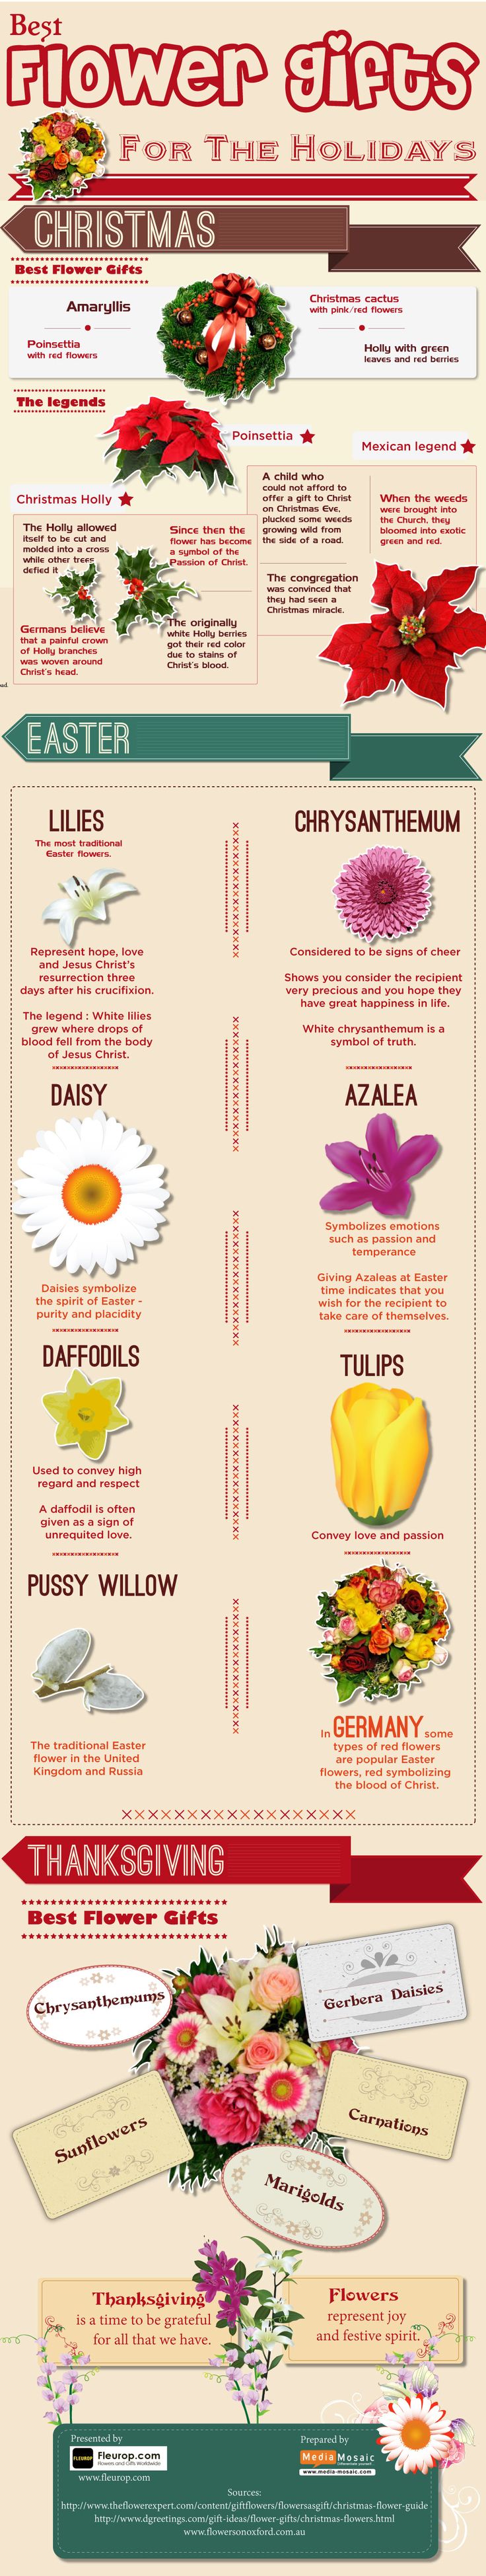 Flowers Make a Great Gift [Infographic]